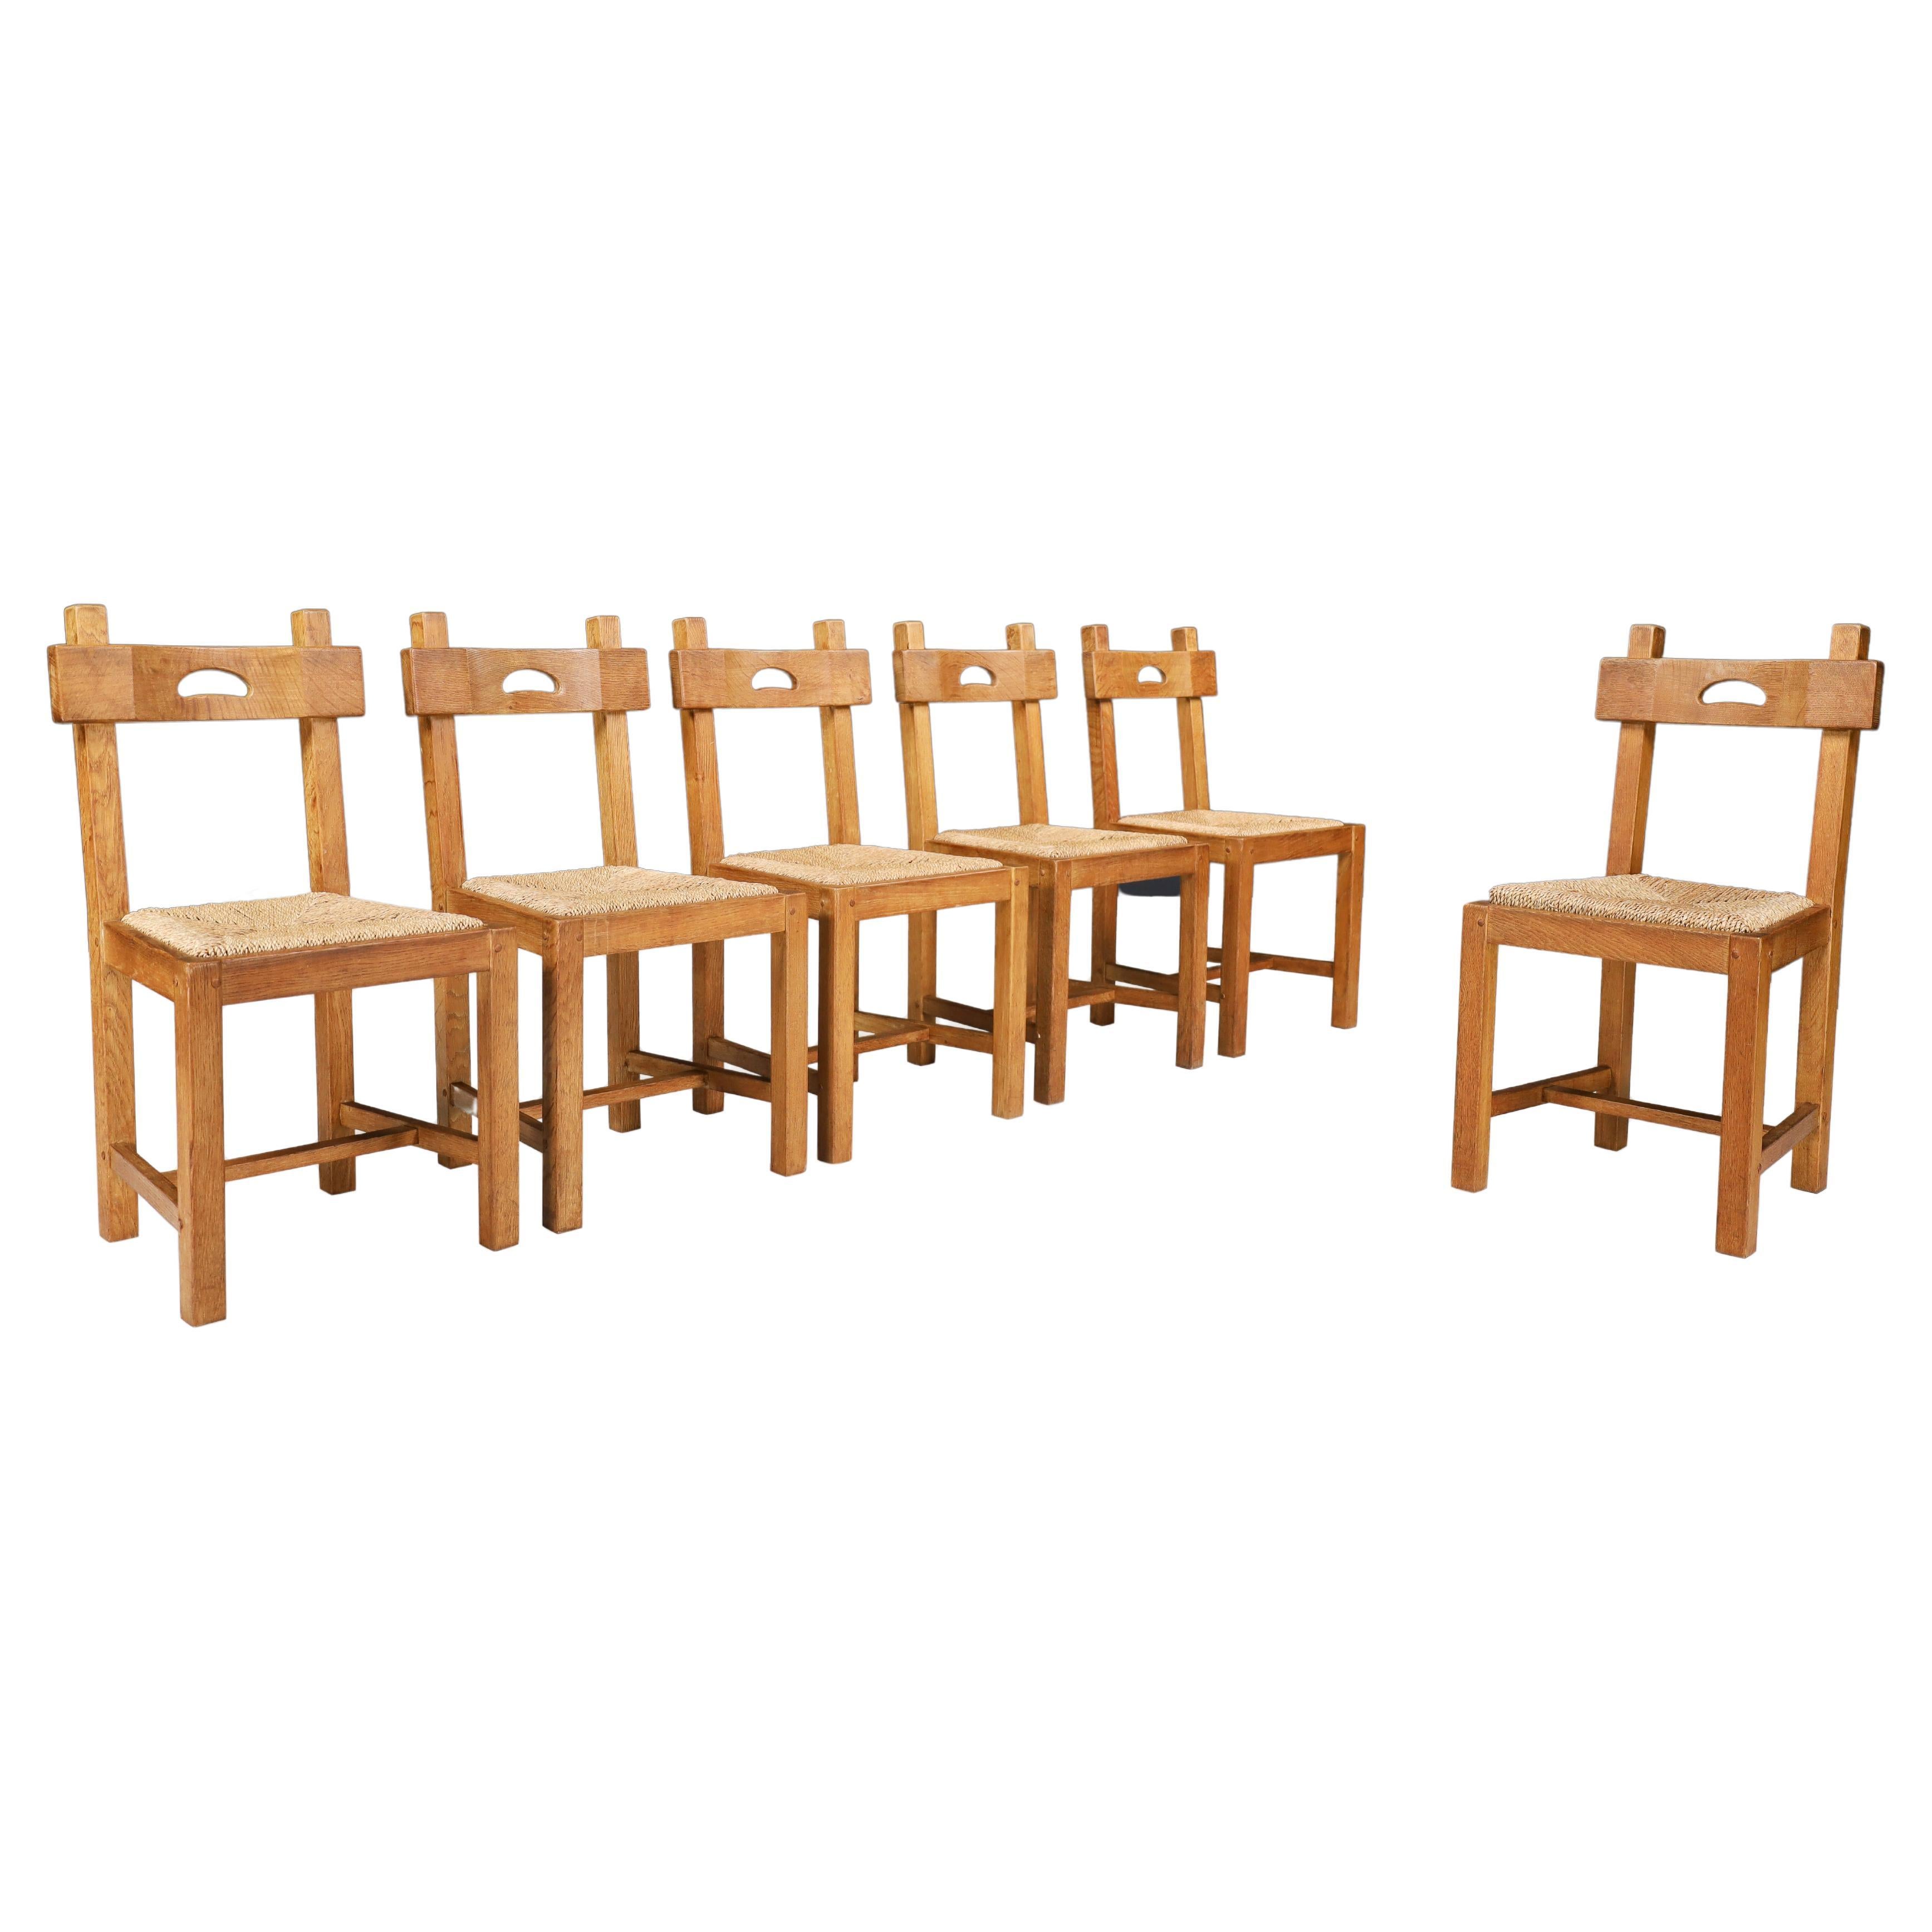 Butralist Dining Chairs in Oak and Rush, France, 1960s For Sale